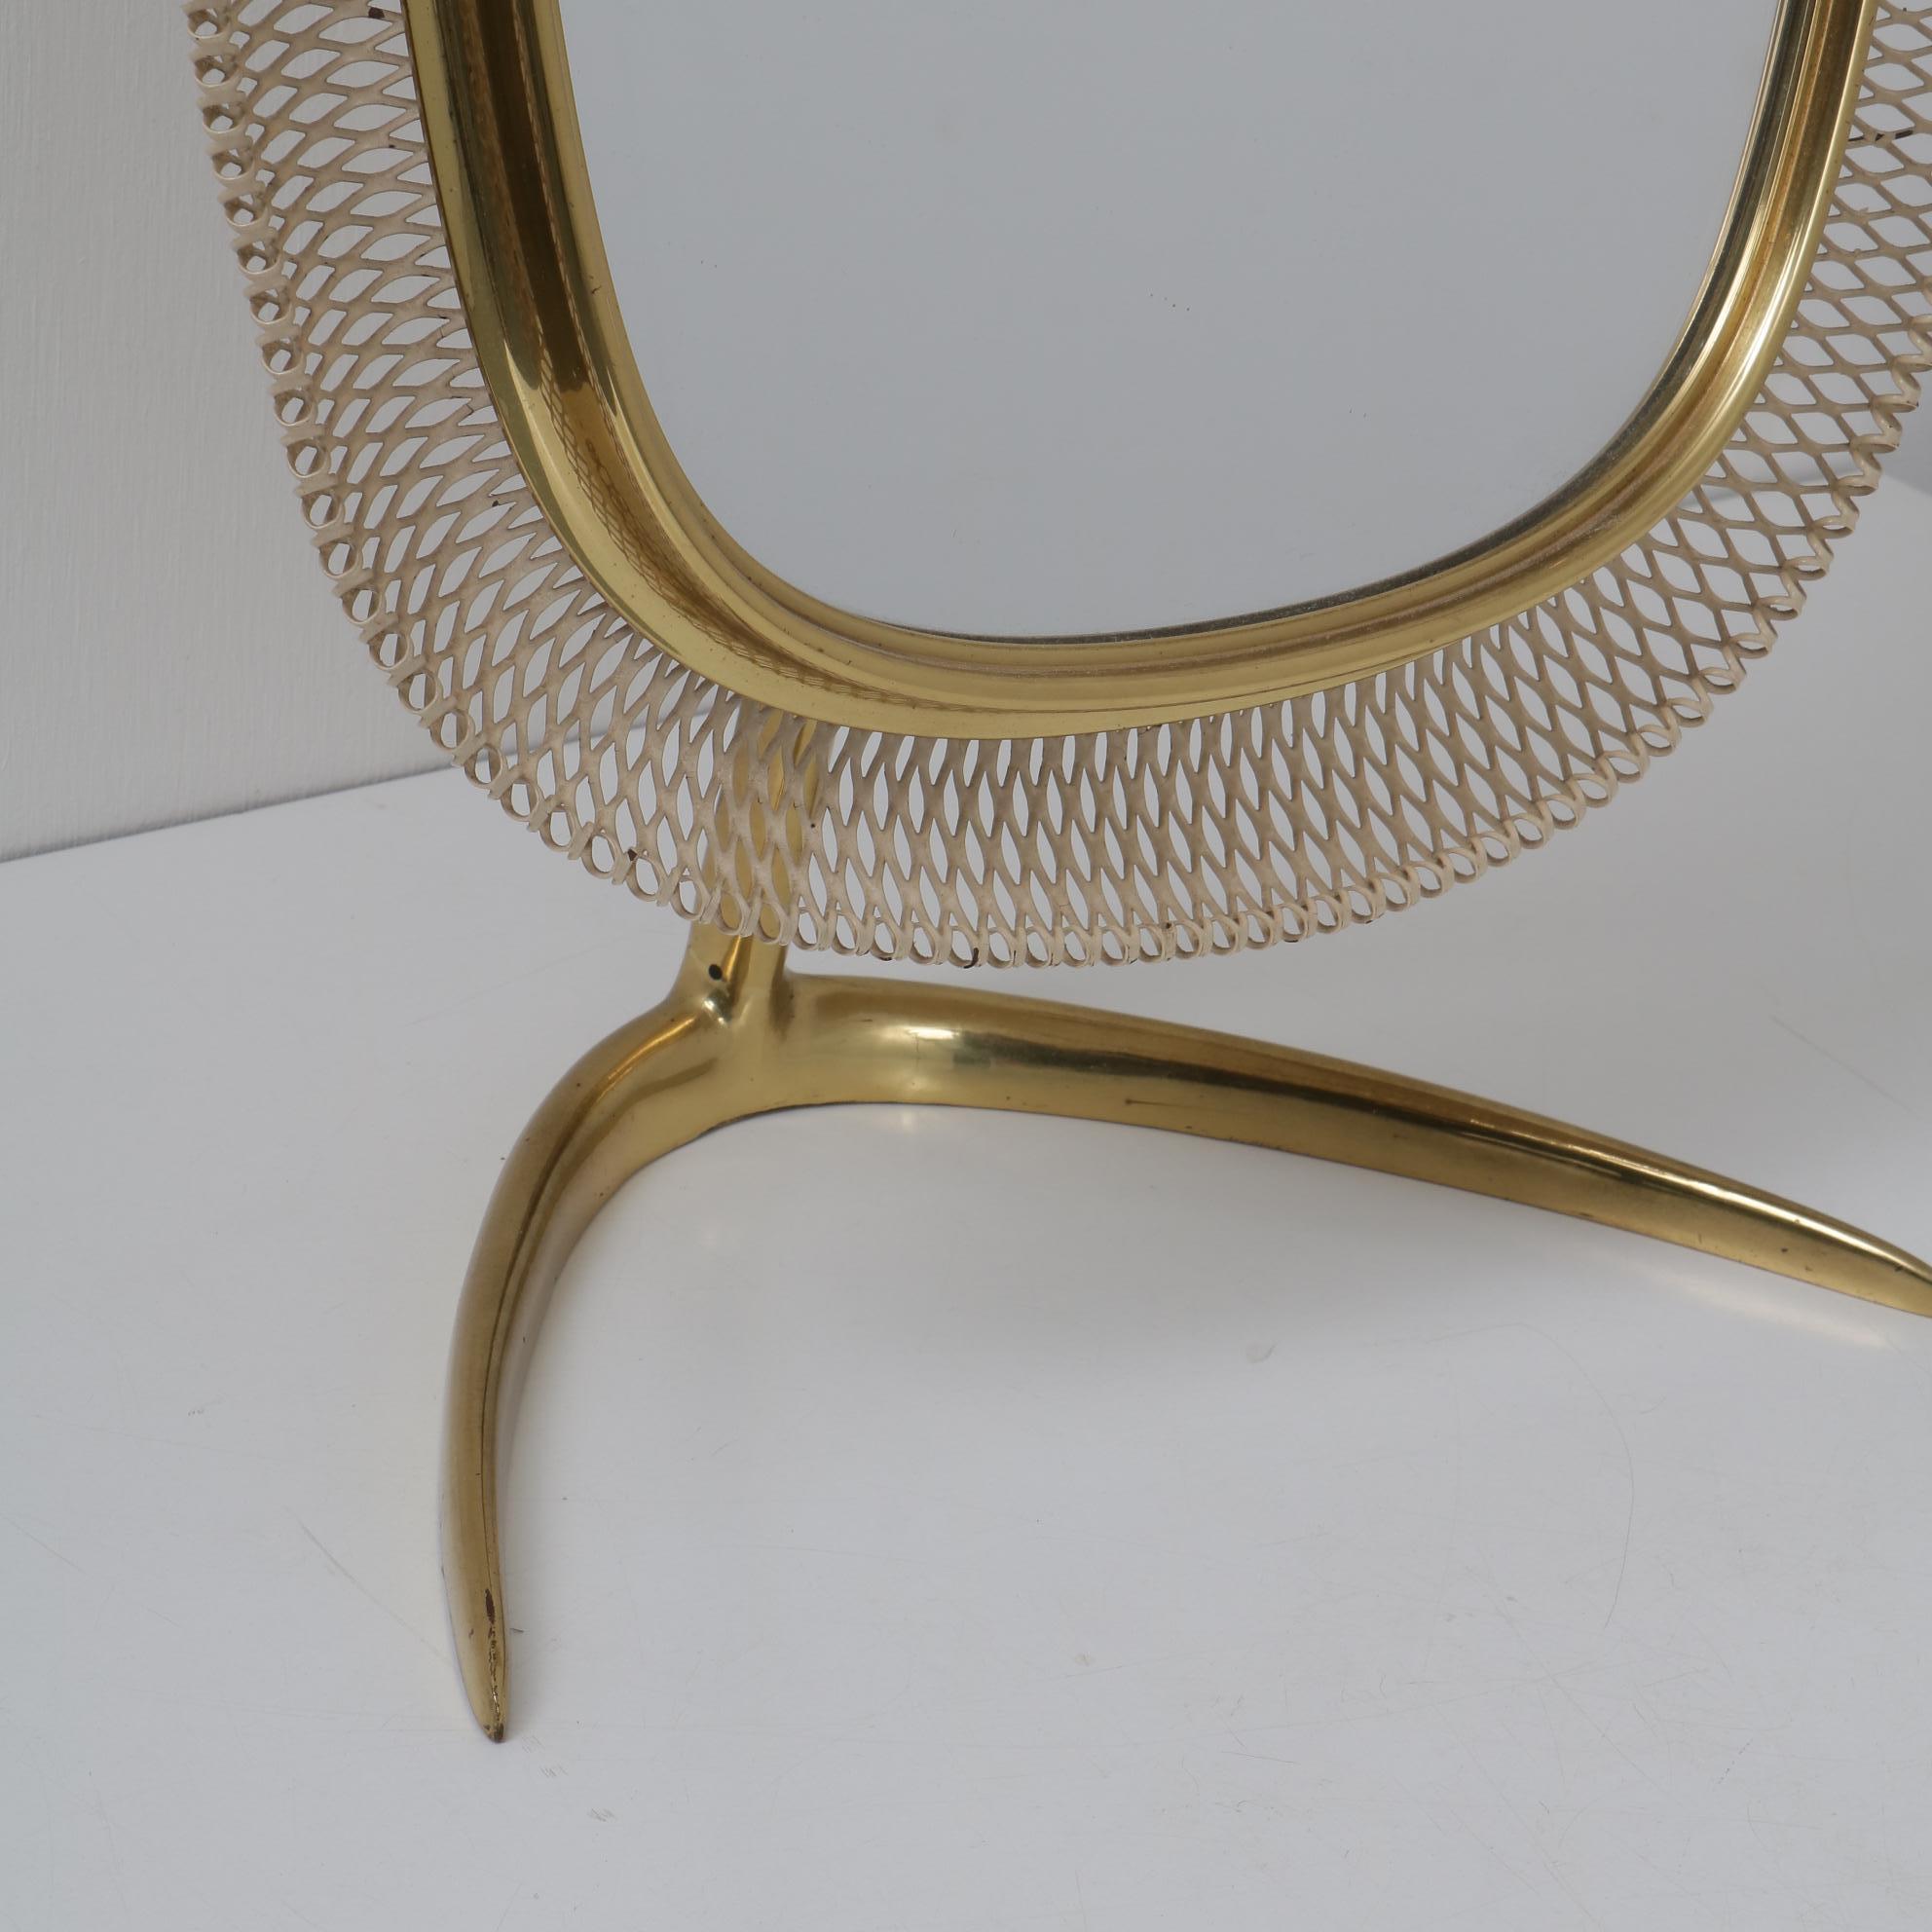 A beautiful vanity mirror, manufactured by Vereinigte Werkstätten München in Germany, circa 1950.

This quality piece is made of golden colored brass with a white perforated metal edge. It stands on a curved foot, the mirror itself has a